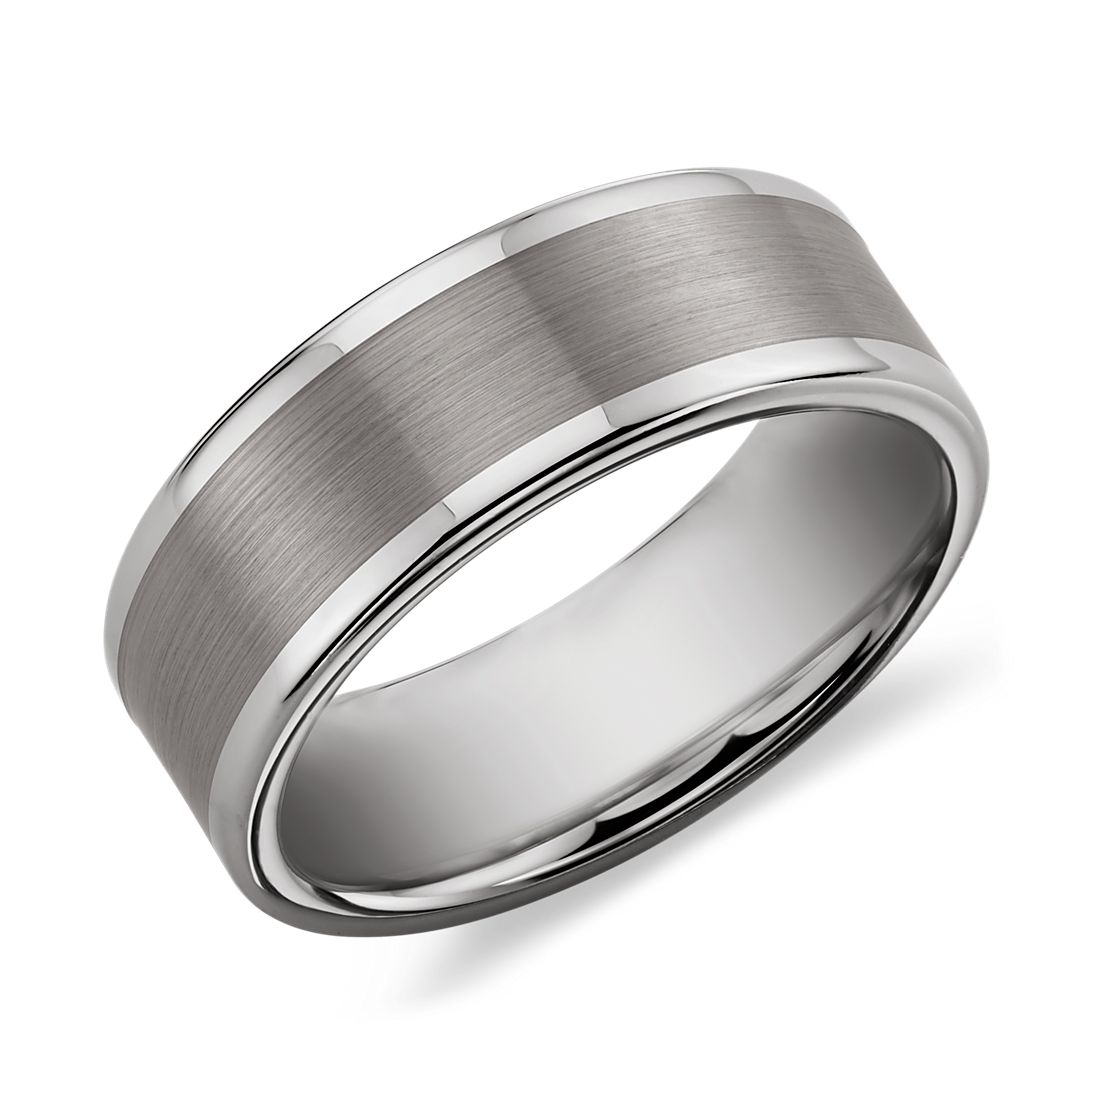 Brushed and Polished Comfort Fit Wedding Ring in Classic Grey Tungsten Carbide (8mm)